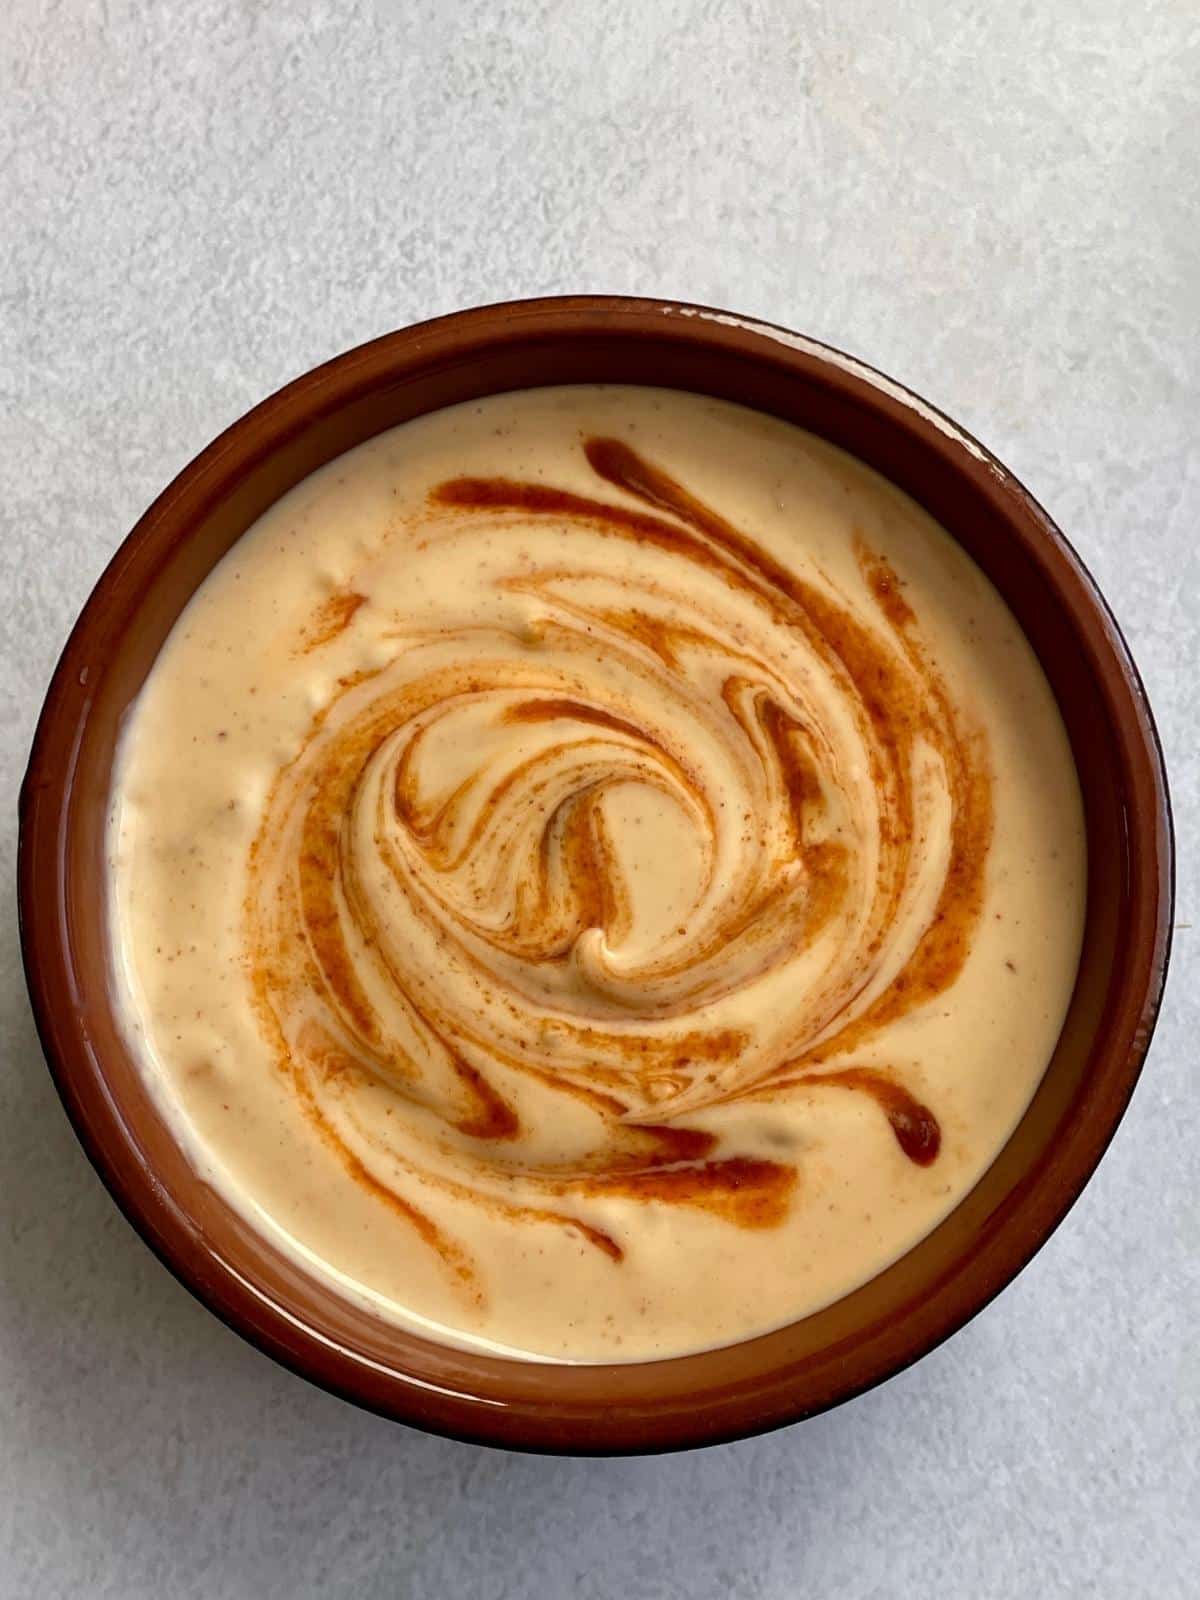 Spicy mayo in a dish.